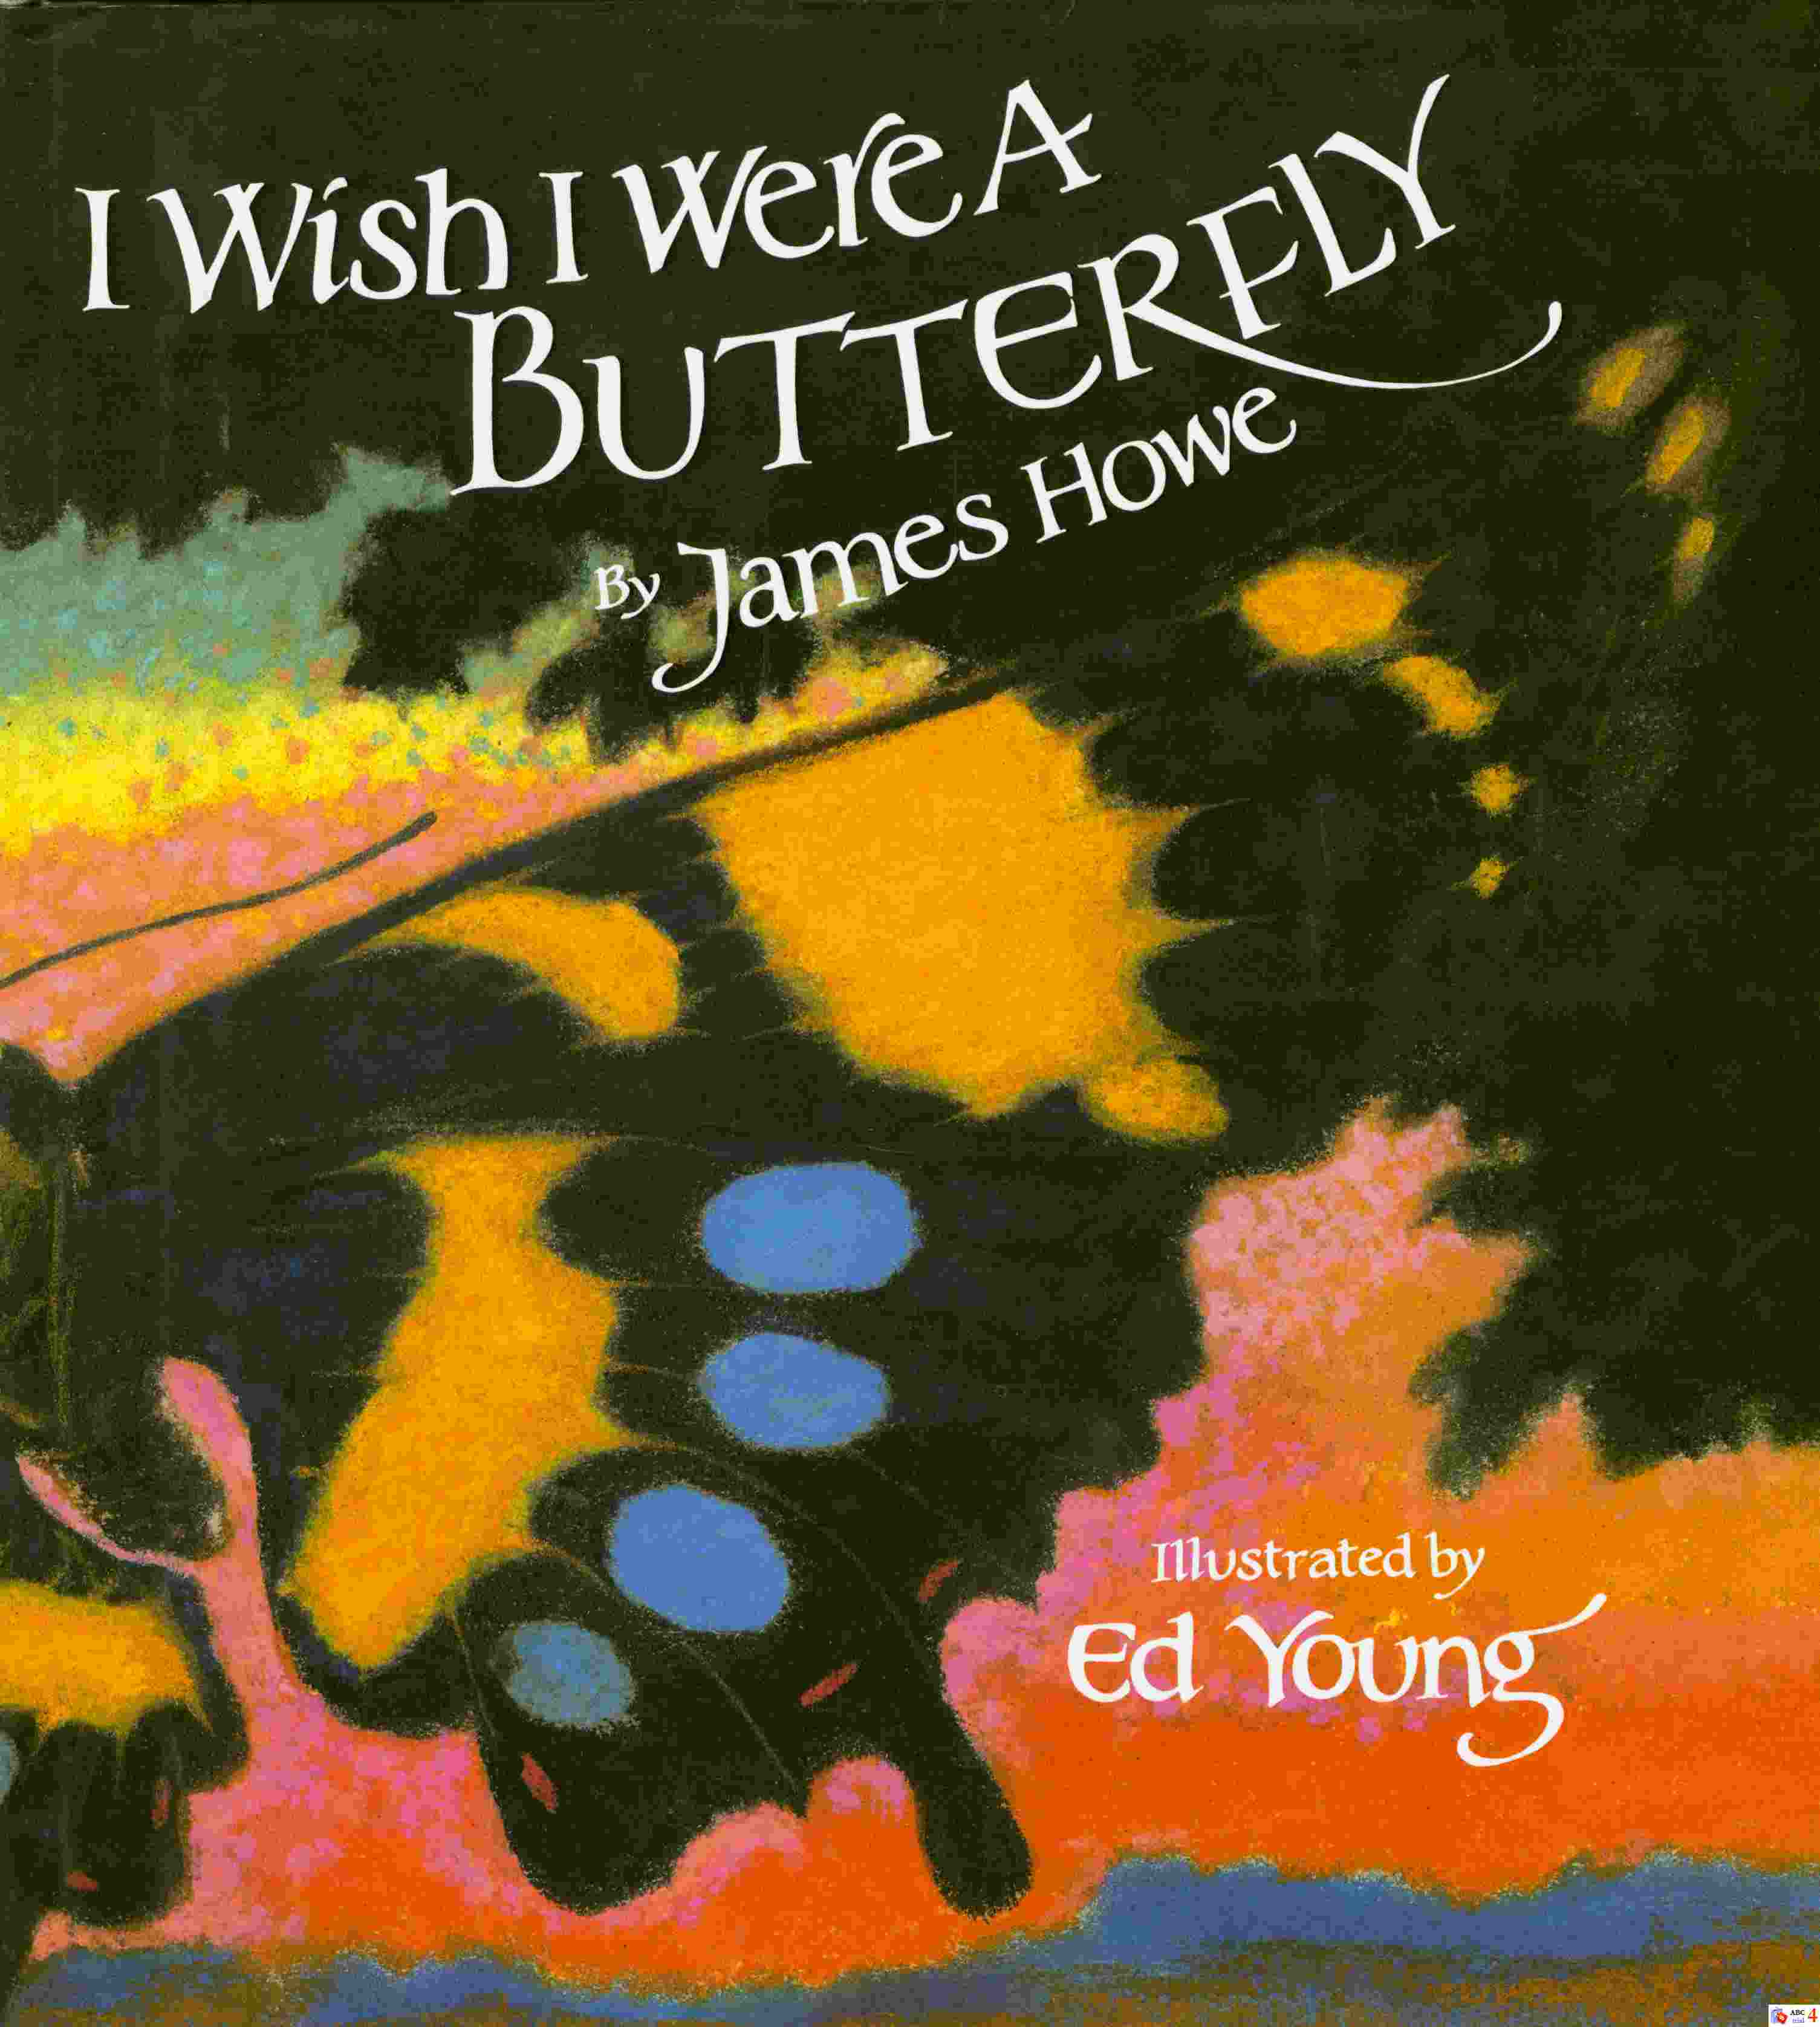 I Wish I were a butterfly 封面